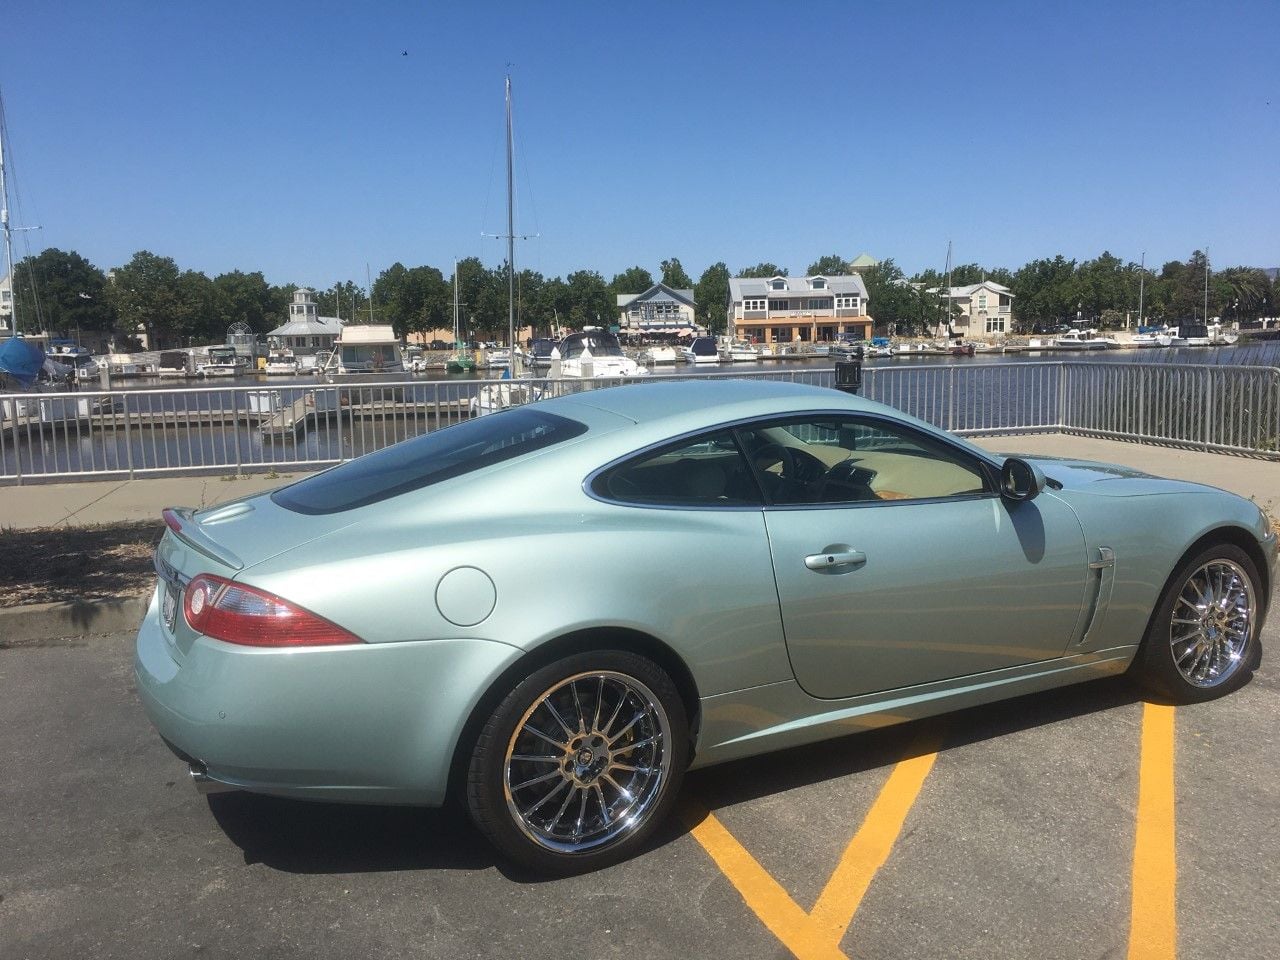 2008 Jaguar XK - 2008 xk 8 (150) in excellent condition. Long term jaguar owners - Used - VIN SAJWA43B585 - 67,200 Miles - 8 cyl - 2WD - Automatic - Coupe - Other - Fairfield, CA 94533, United States